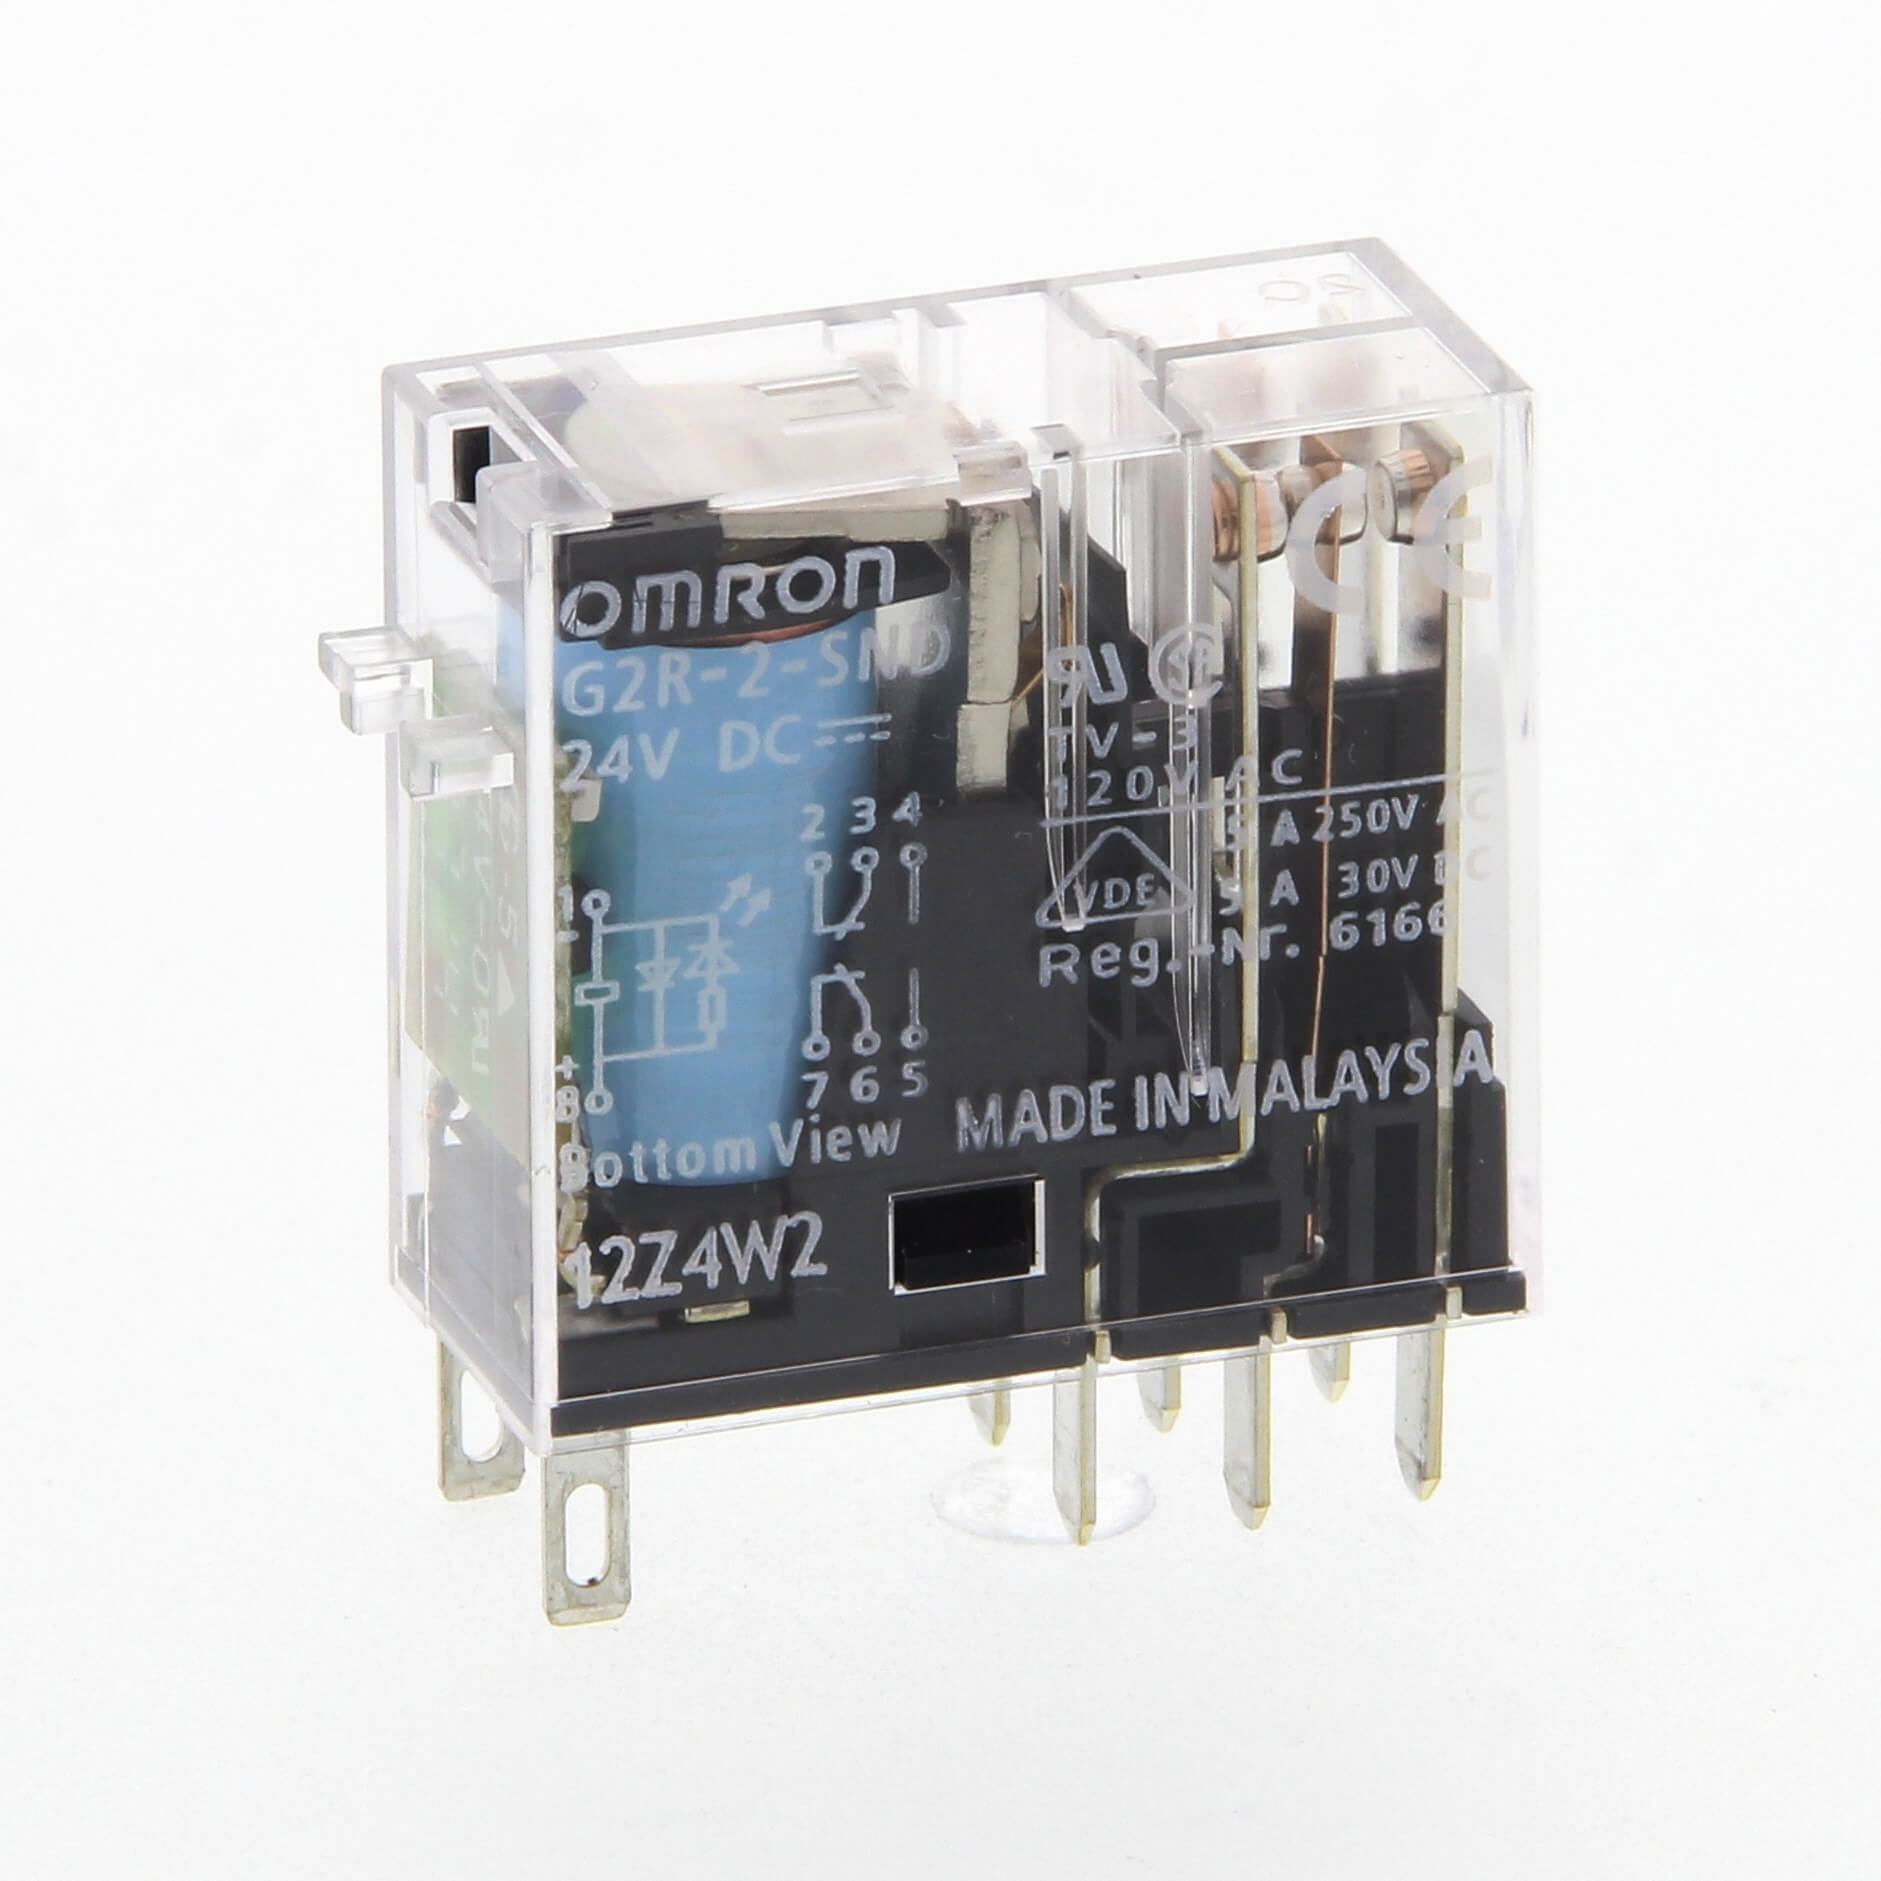 Omron G2R-2-SND Relay with Socket Base 